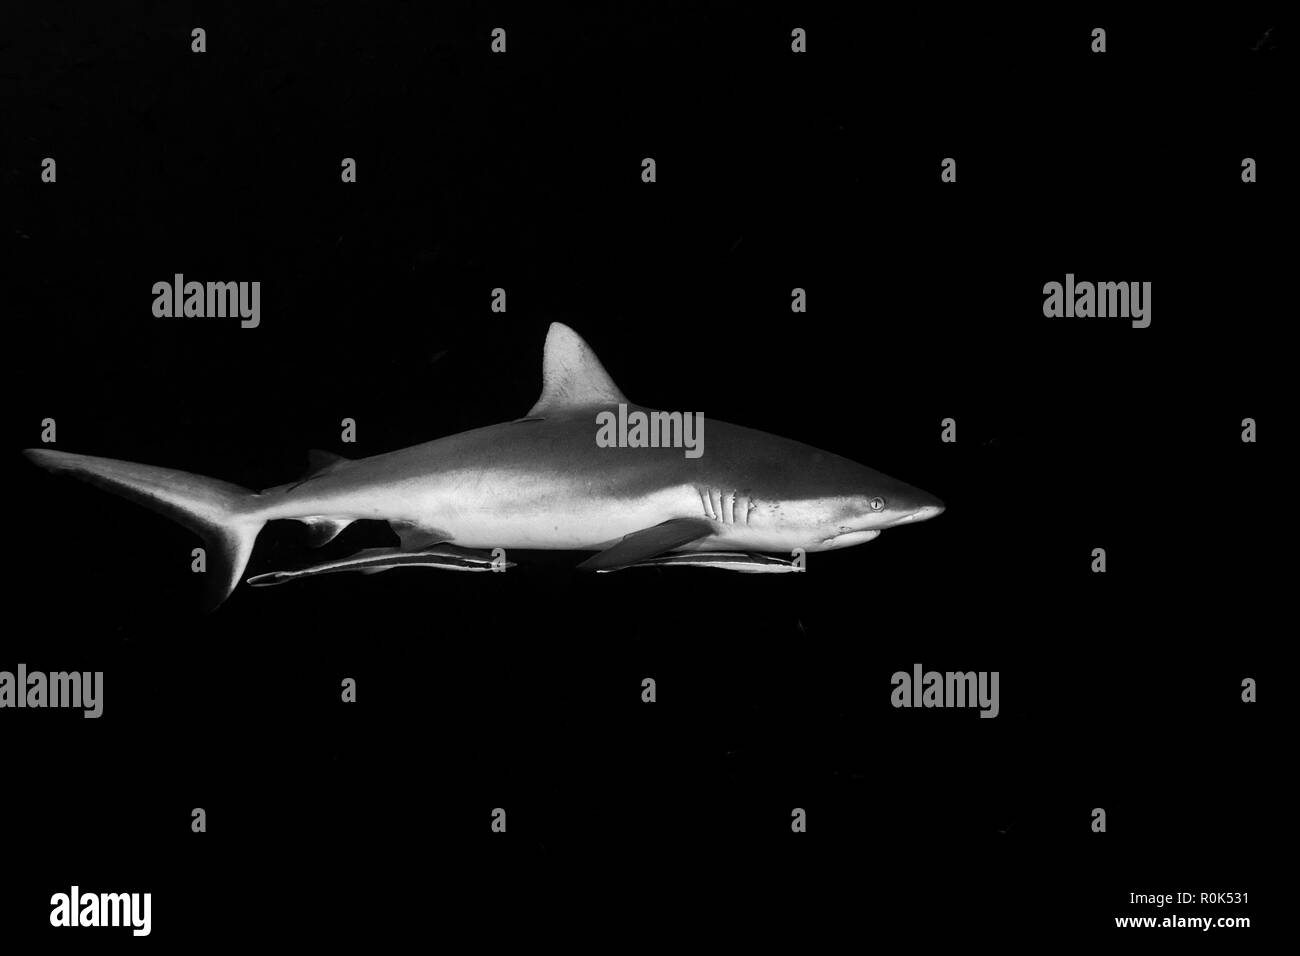 Grey reef shark with remoras attached, Palau. Stock Photo